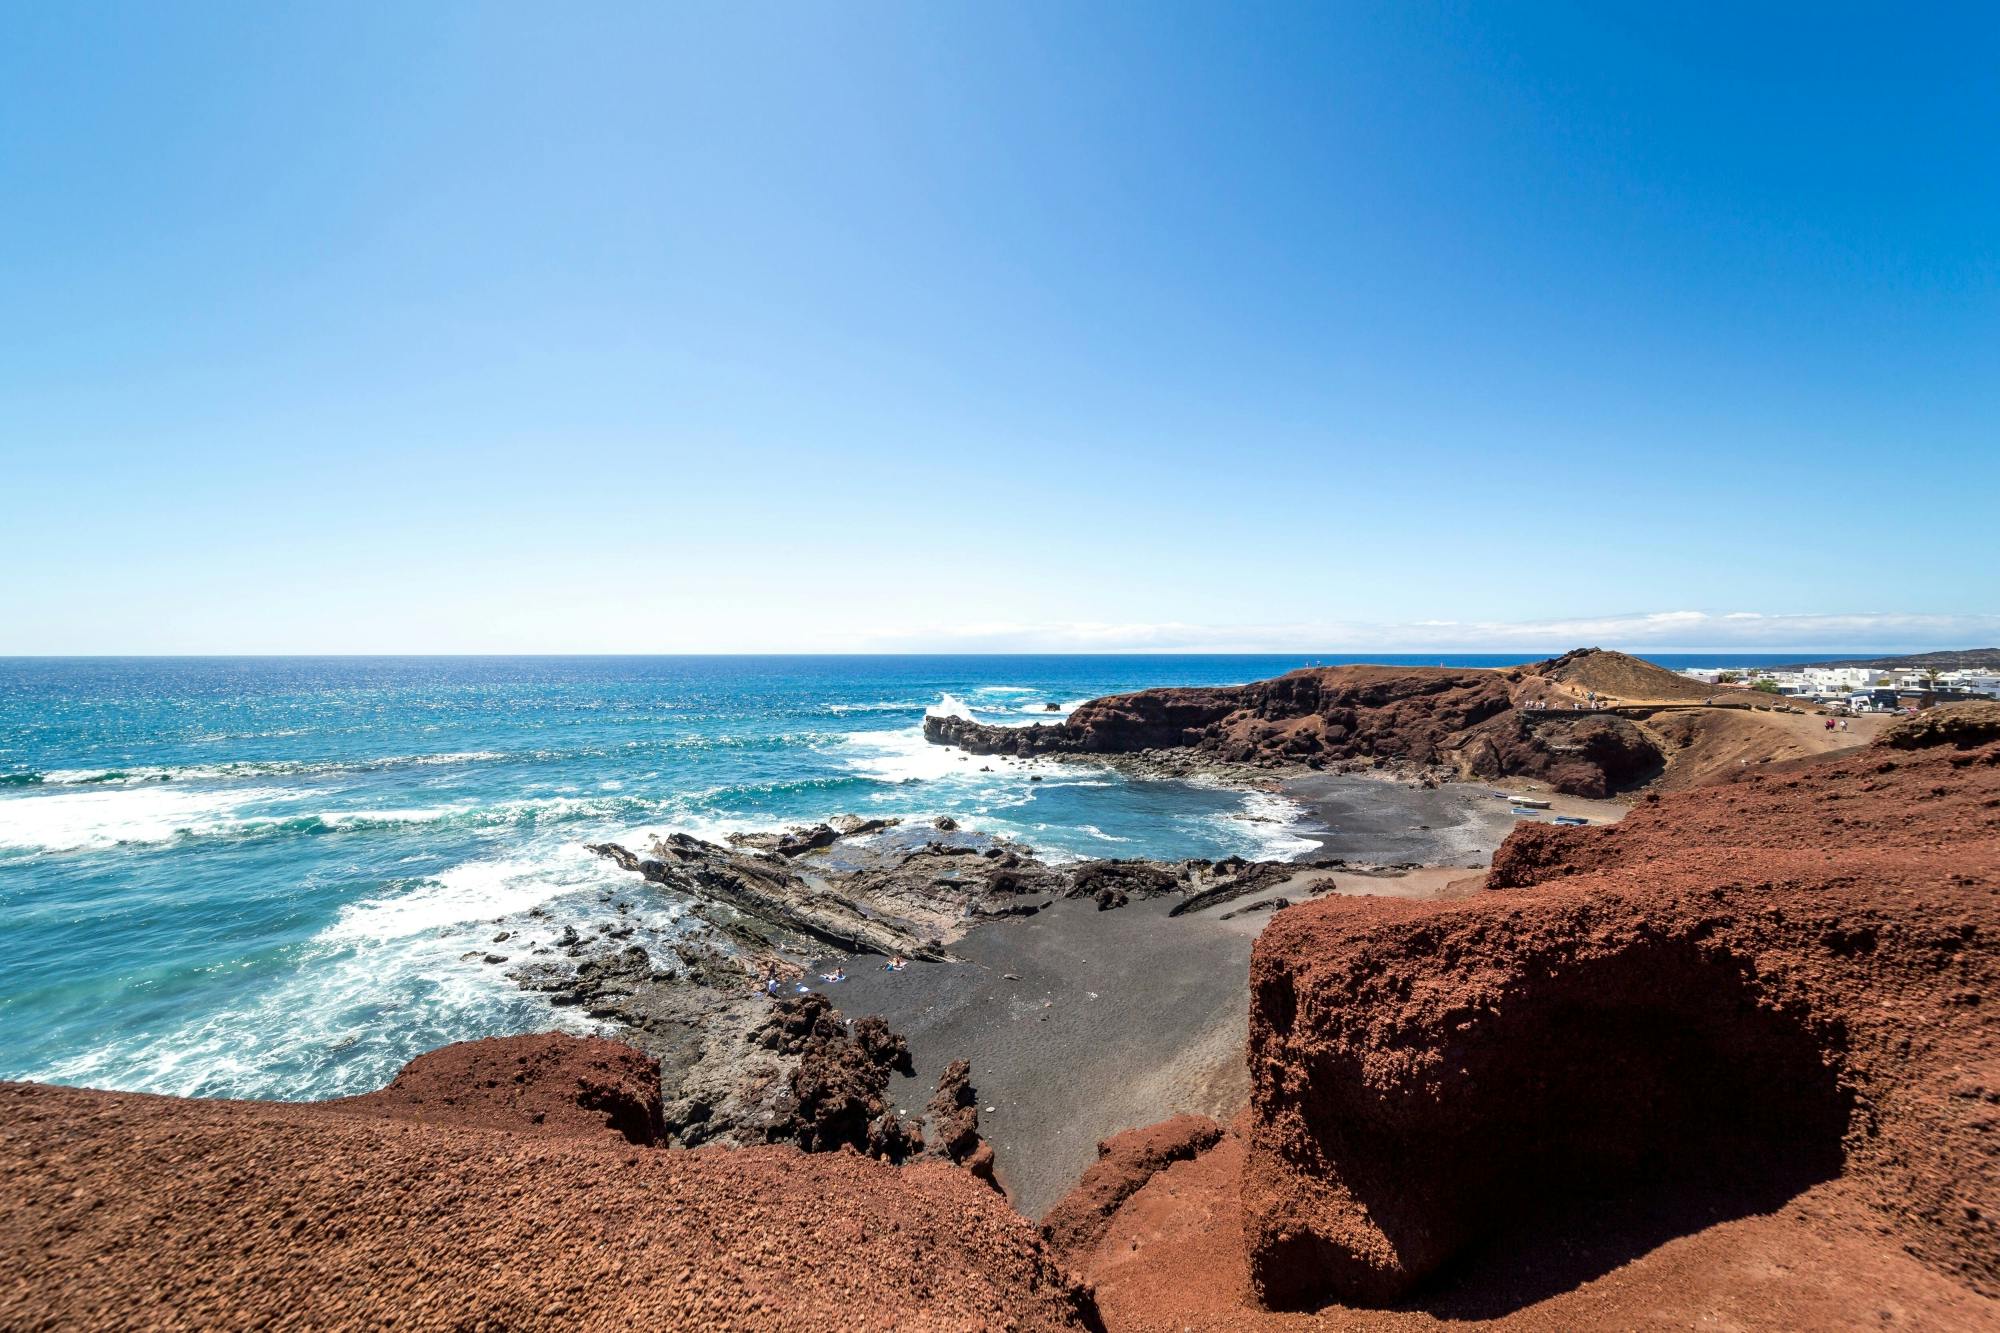 Lanzarote Tour with Timanfaya National Park, Winery and El Golfo